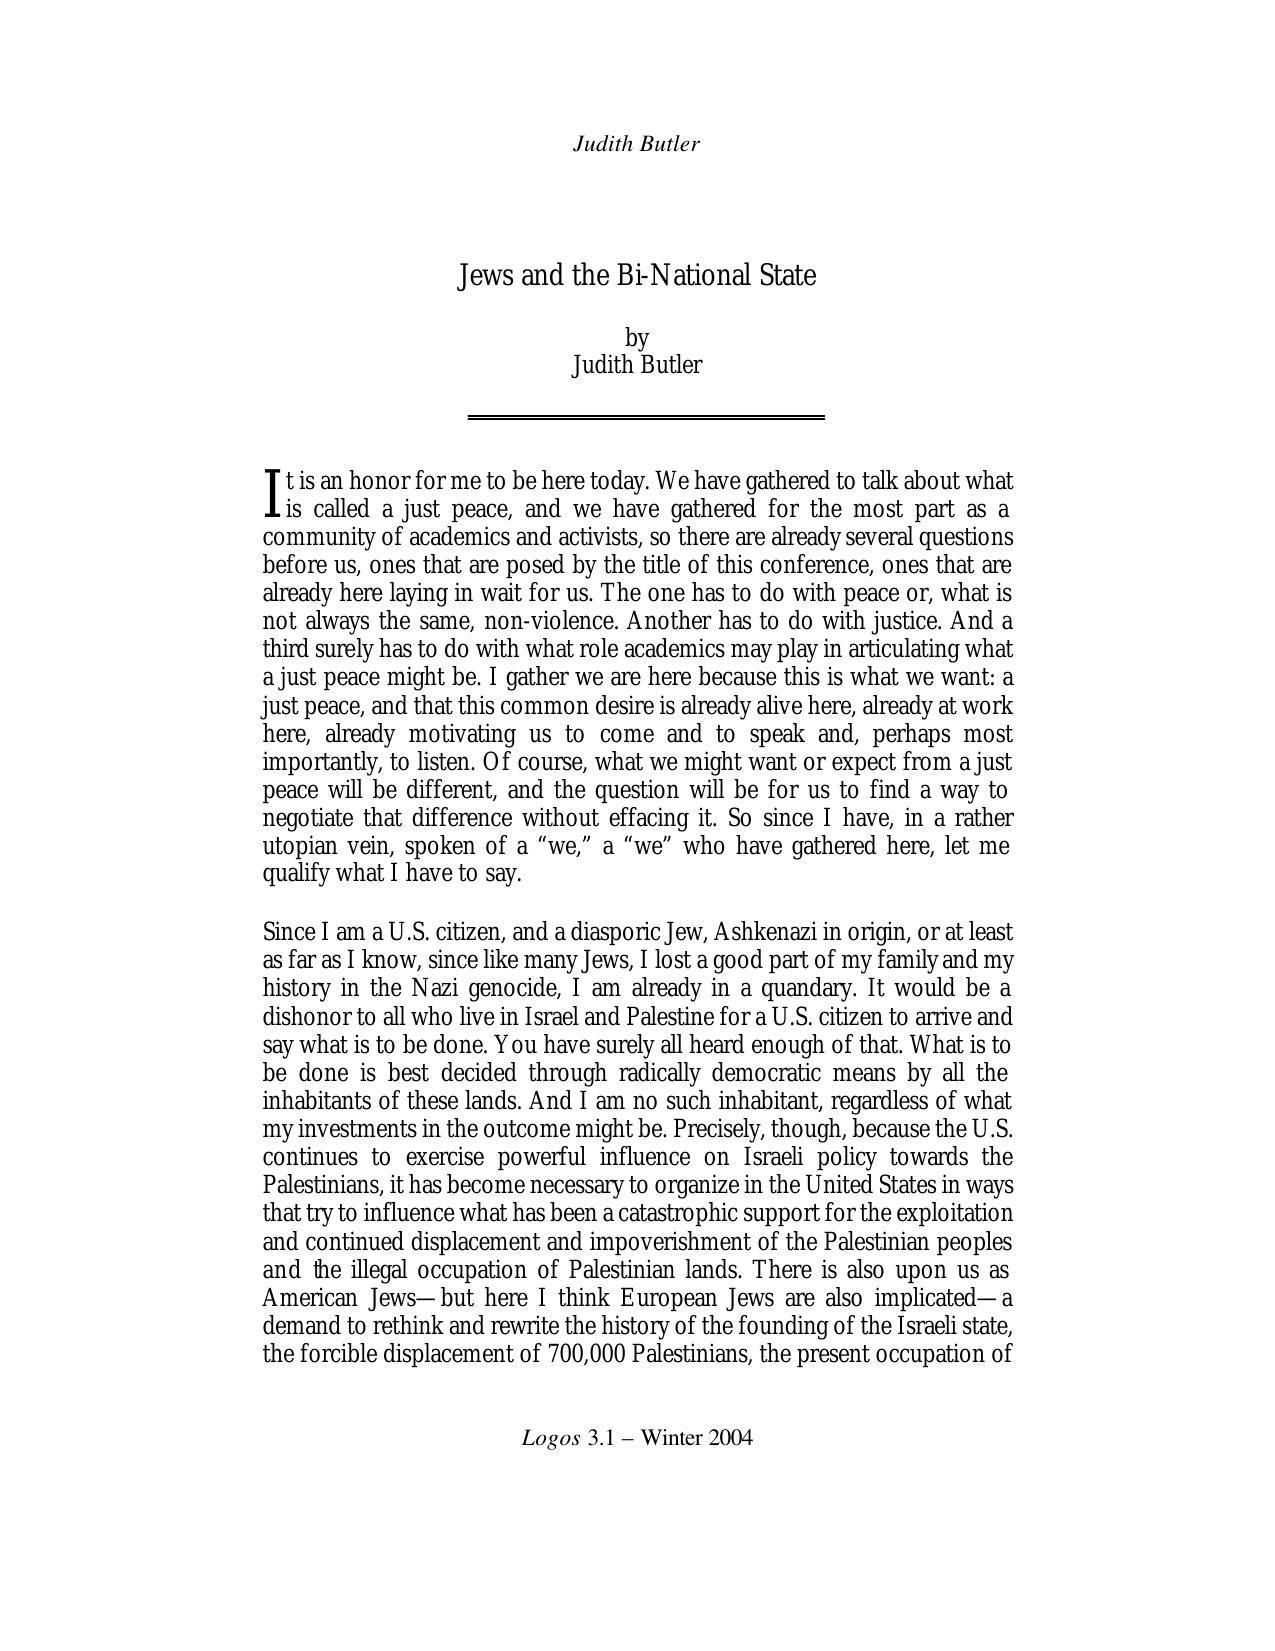 Jews and the Bi-National State [Essay]